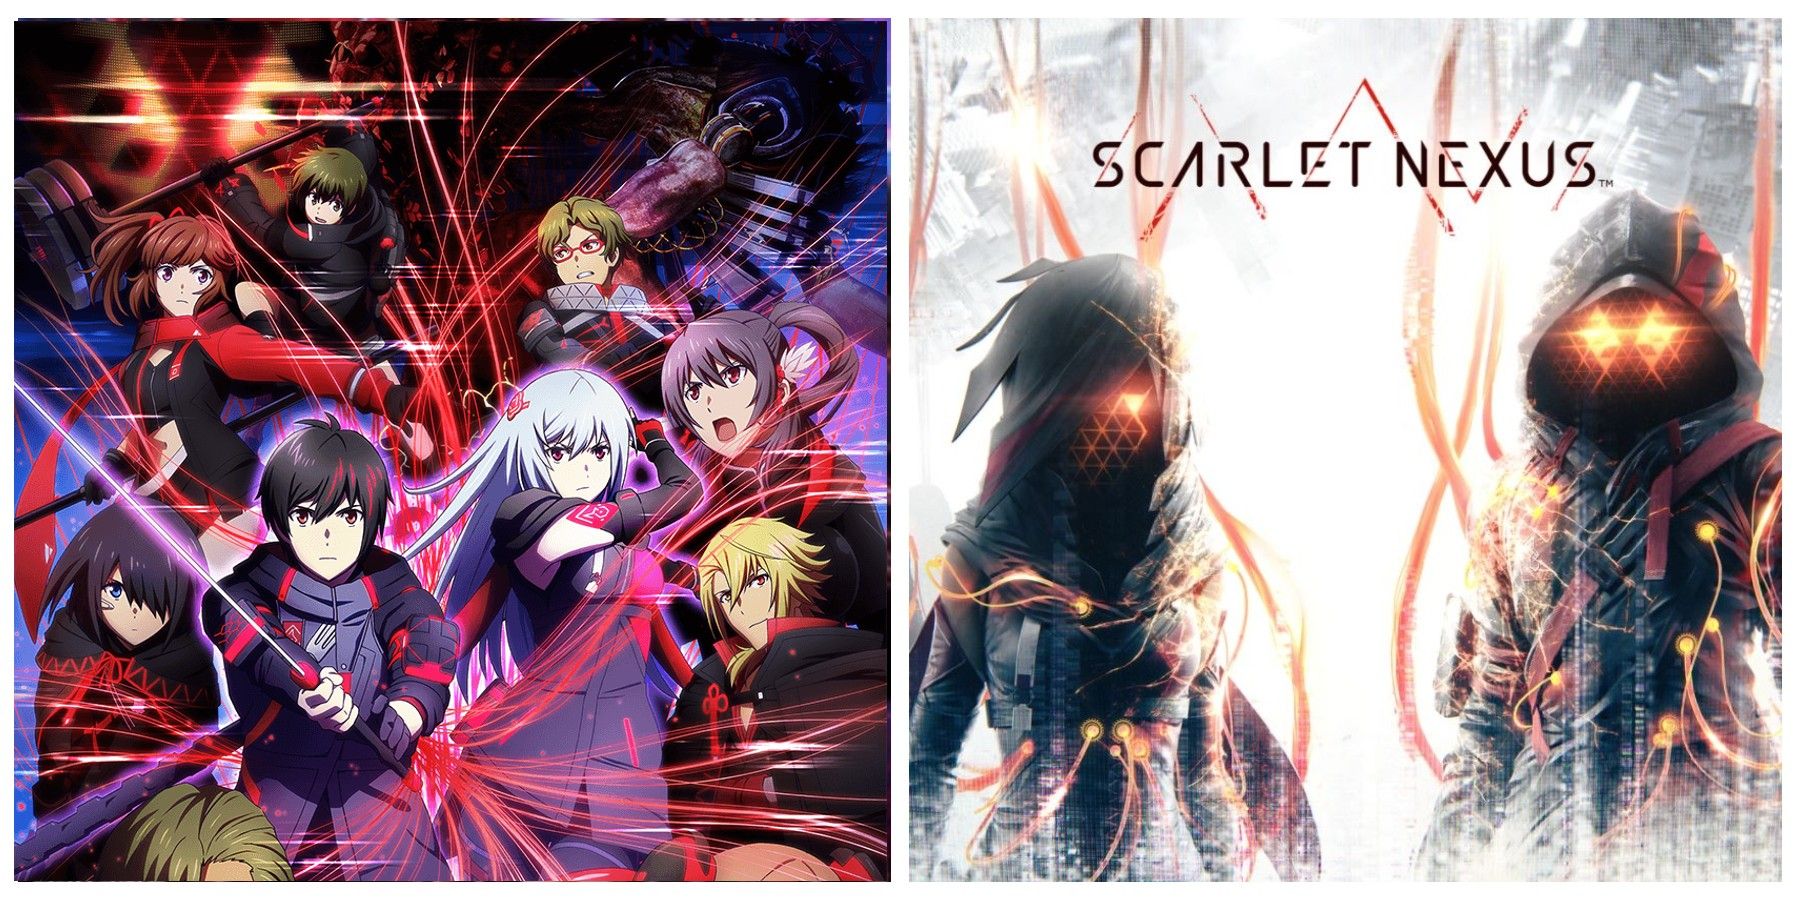 Does Scarlet Nexus Have What It Takes To Be The Next Big Action RPG Series?